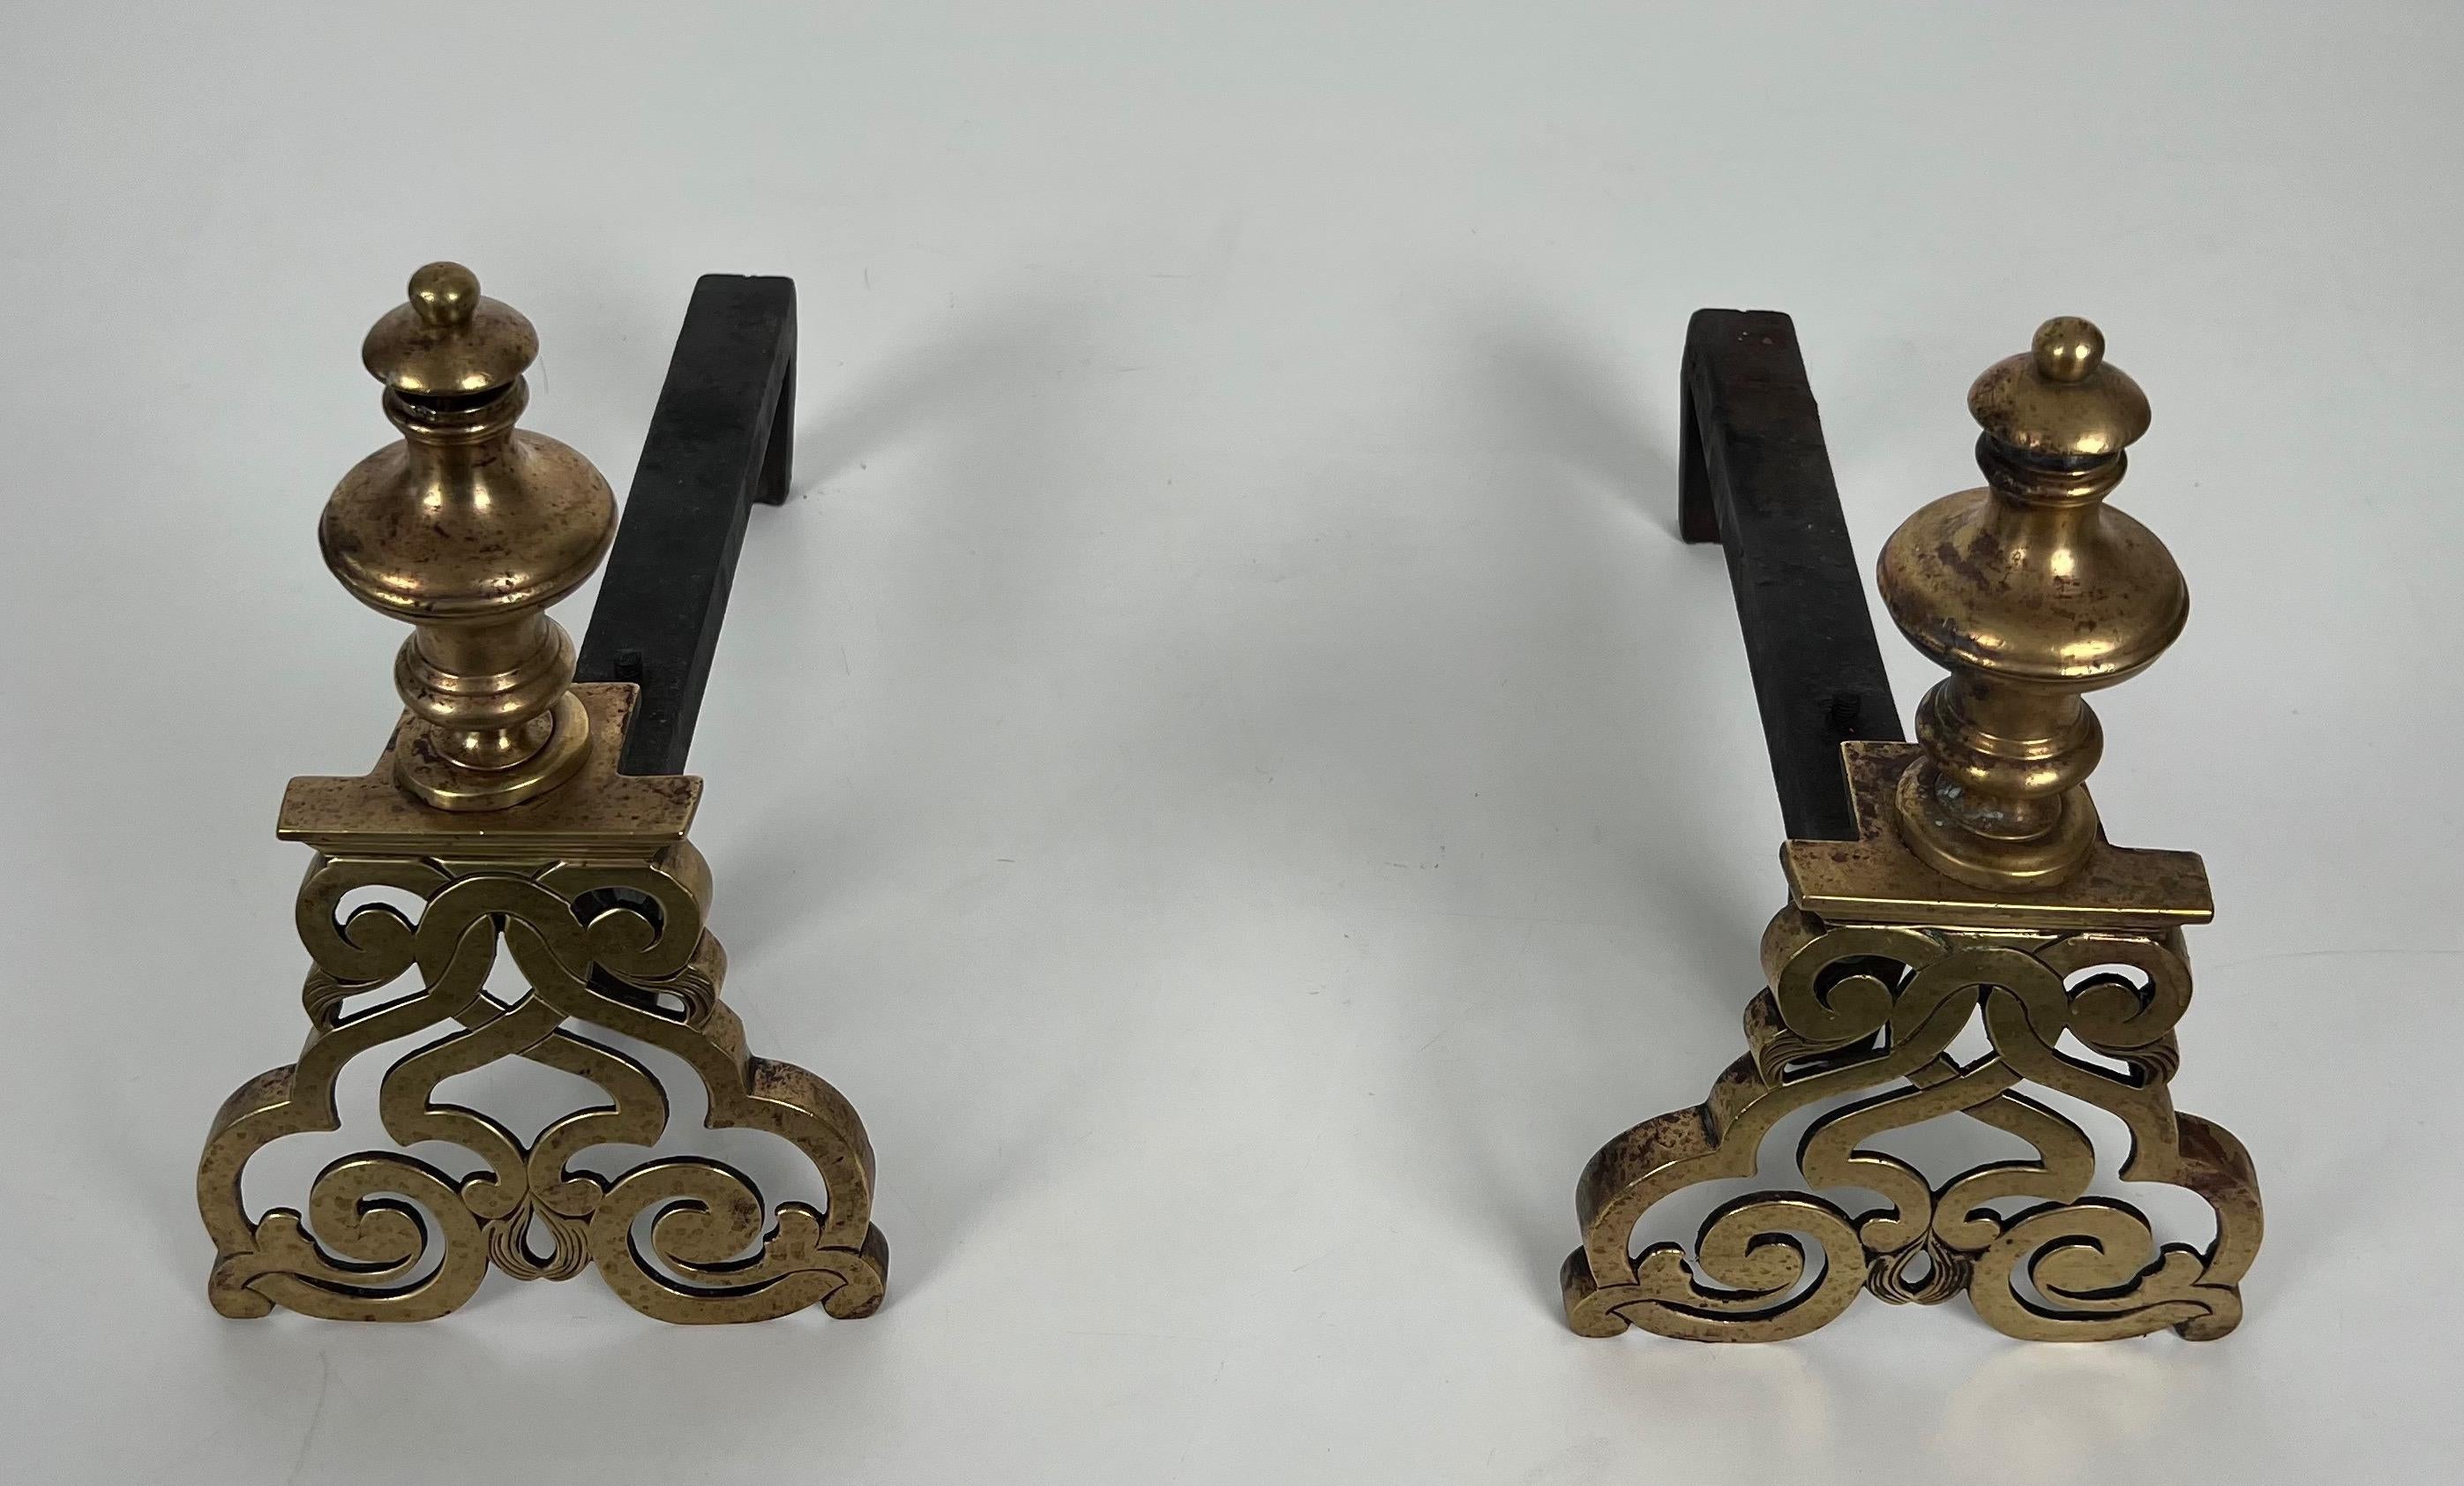 This pair of andirons is made of chiseled bronze and wrought iron. This is a French work in the Louis the 15th style. Beginning of 19th century